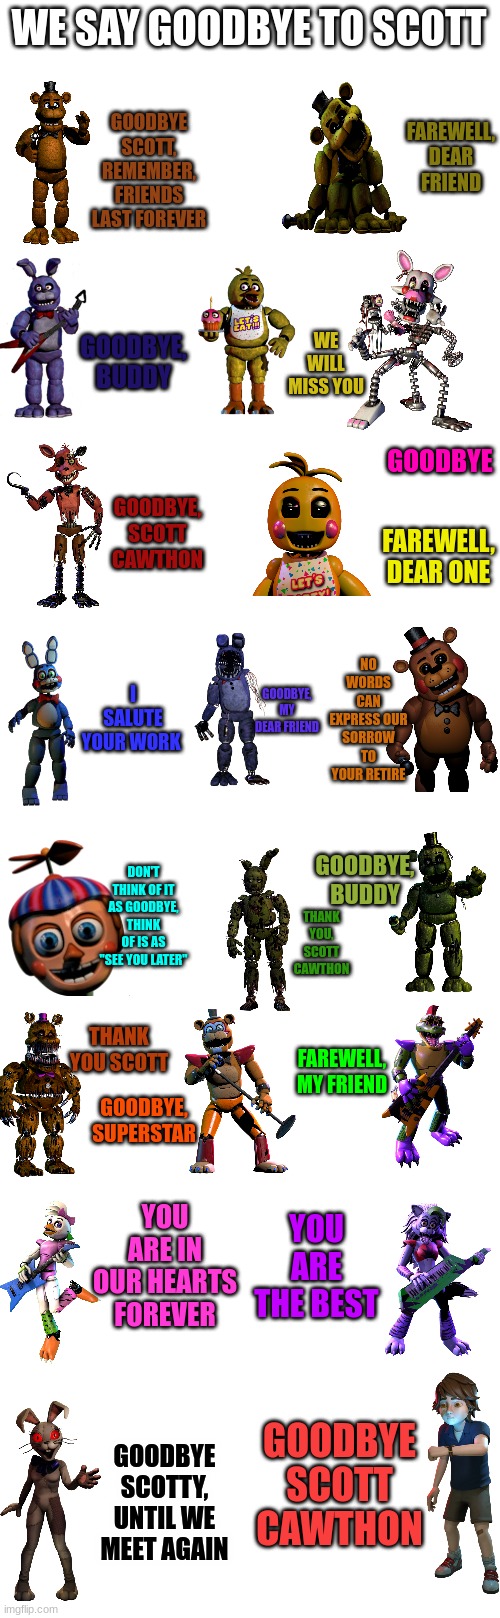 Goodbye Scott, we will miss you | WE SAY GOODBYE TO SCOTT; GOODBYE SCOTT, REMEMBER, FRIENDS LAST FOREVER; FAREWELL, DEAR FRIEND; GOODBYE, BUDDY; WE WILL MISS YOU; GOODBYE; GOODBYE, SCOTT CAWTHON; FAREWELL, DEAR ONE; NO WORDS CAN EXPRESS OUR SORROW TO YOUR RETIRE; I SALUTE YOUR WORK; GOODBYE, MY DEAR FRIEND; DON'T THINK OF IT AS GOODBYE, THINK OF IS AS "SEE YOU LATER"; GOODBYE, BUDDY; THANK YOU, SCOTT CAWTHON; THANK YOU SCOTT; FAREWELL, MY FRIEND; GOODBYE, SUPERSTAR; YOU ARE IN OUR HEARTS FOREVER; YOU ARE THE BEST; GOODBYE SCOTT CAWTHON; GOODBYE SCOTTY, UNTIL WE MEET AGAIN | image tagged in fnaf,freddy,foxy,chica,bonnie,goodbye scott | made w/ Imgflip meme maker